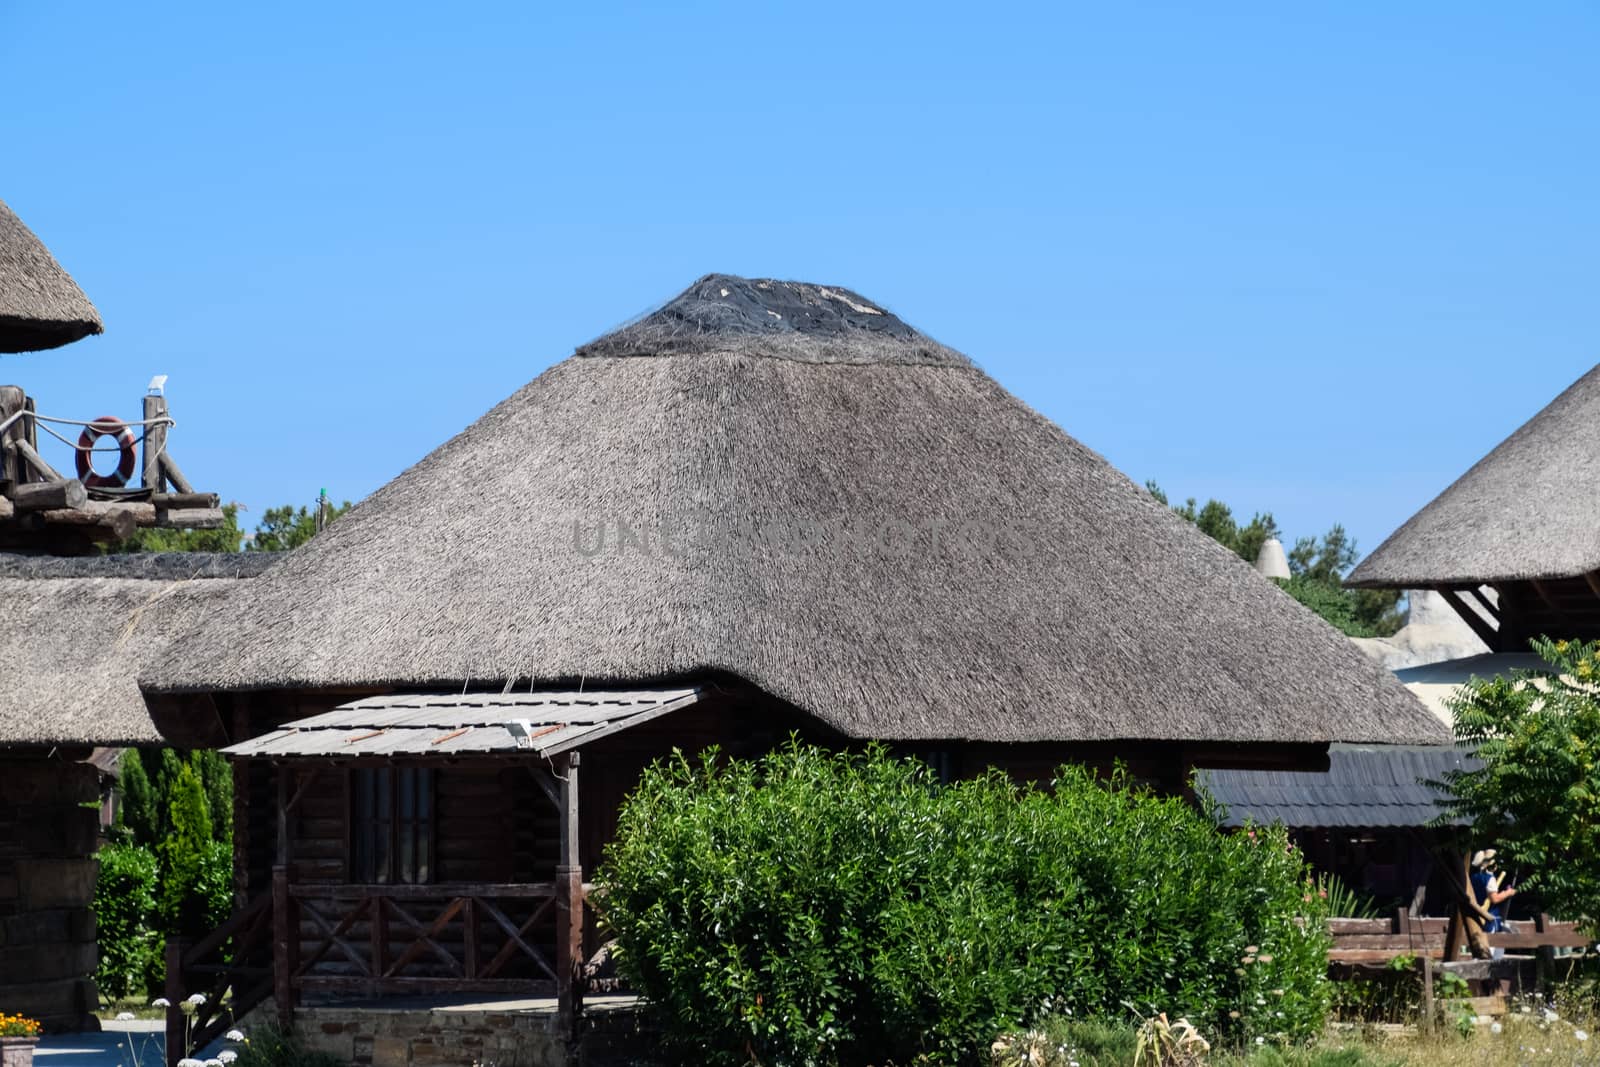 Kafe with a cane roof. The roof is made of reeds and reeds.